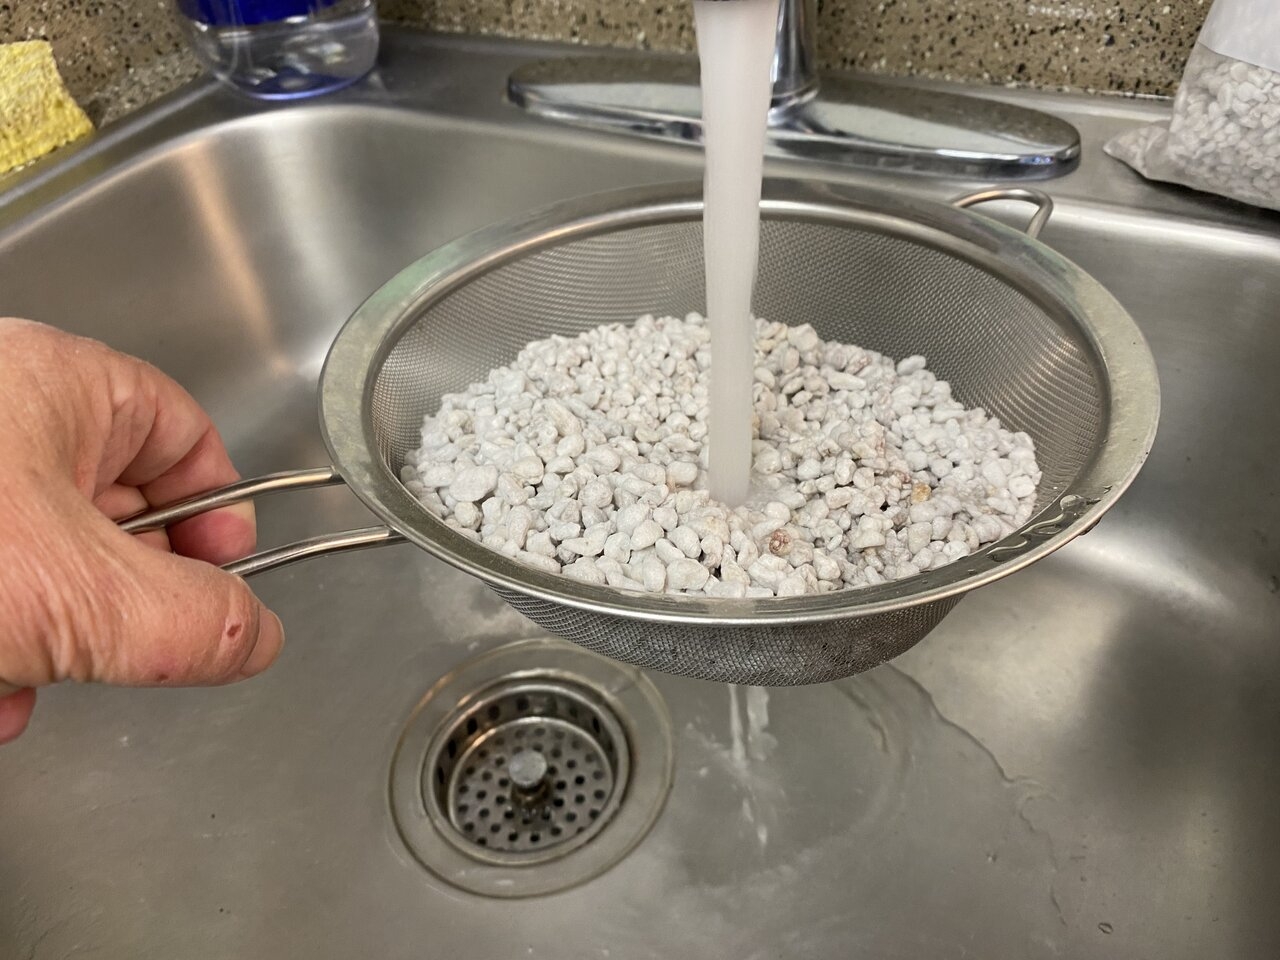 Rinse the dust from the perlite completely